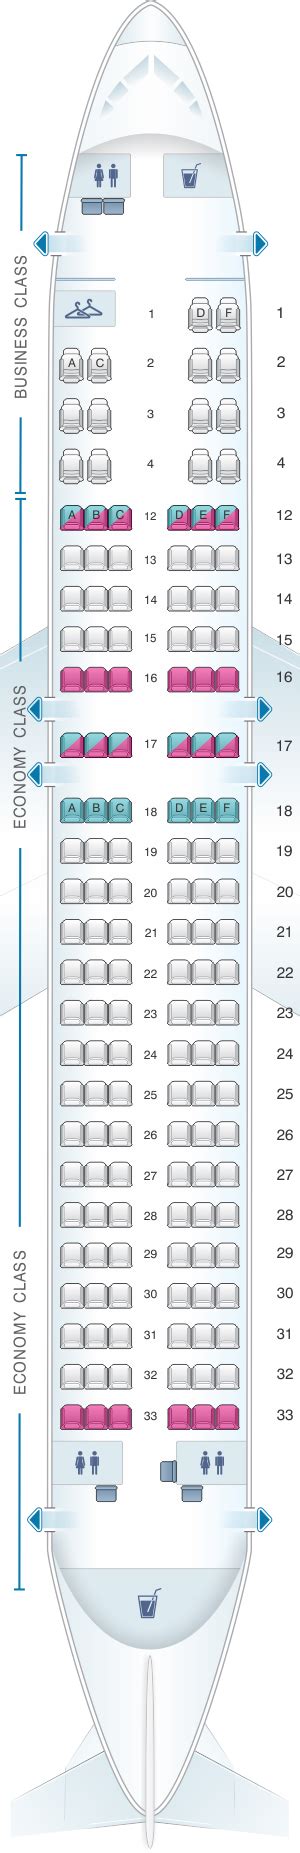 48 Airbus Industrie A320 100 Seating Plan